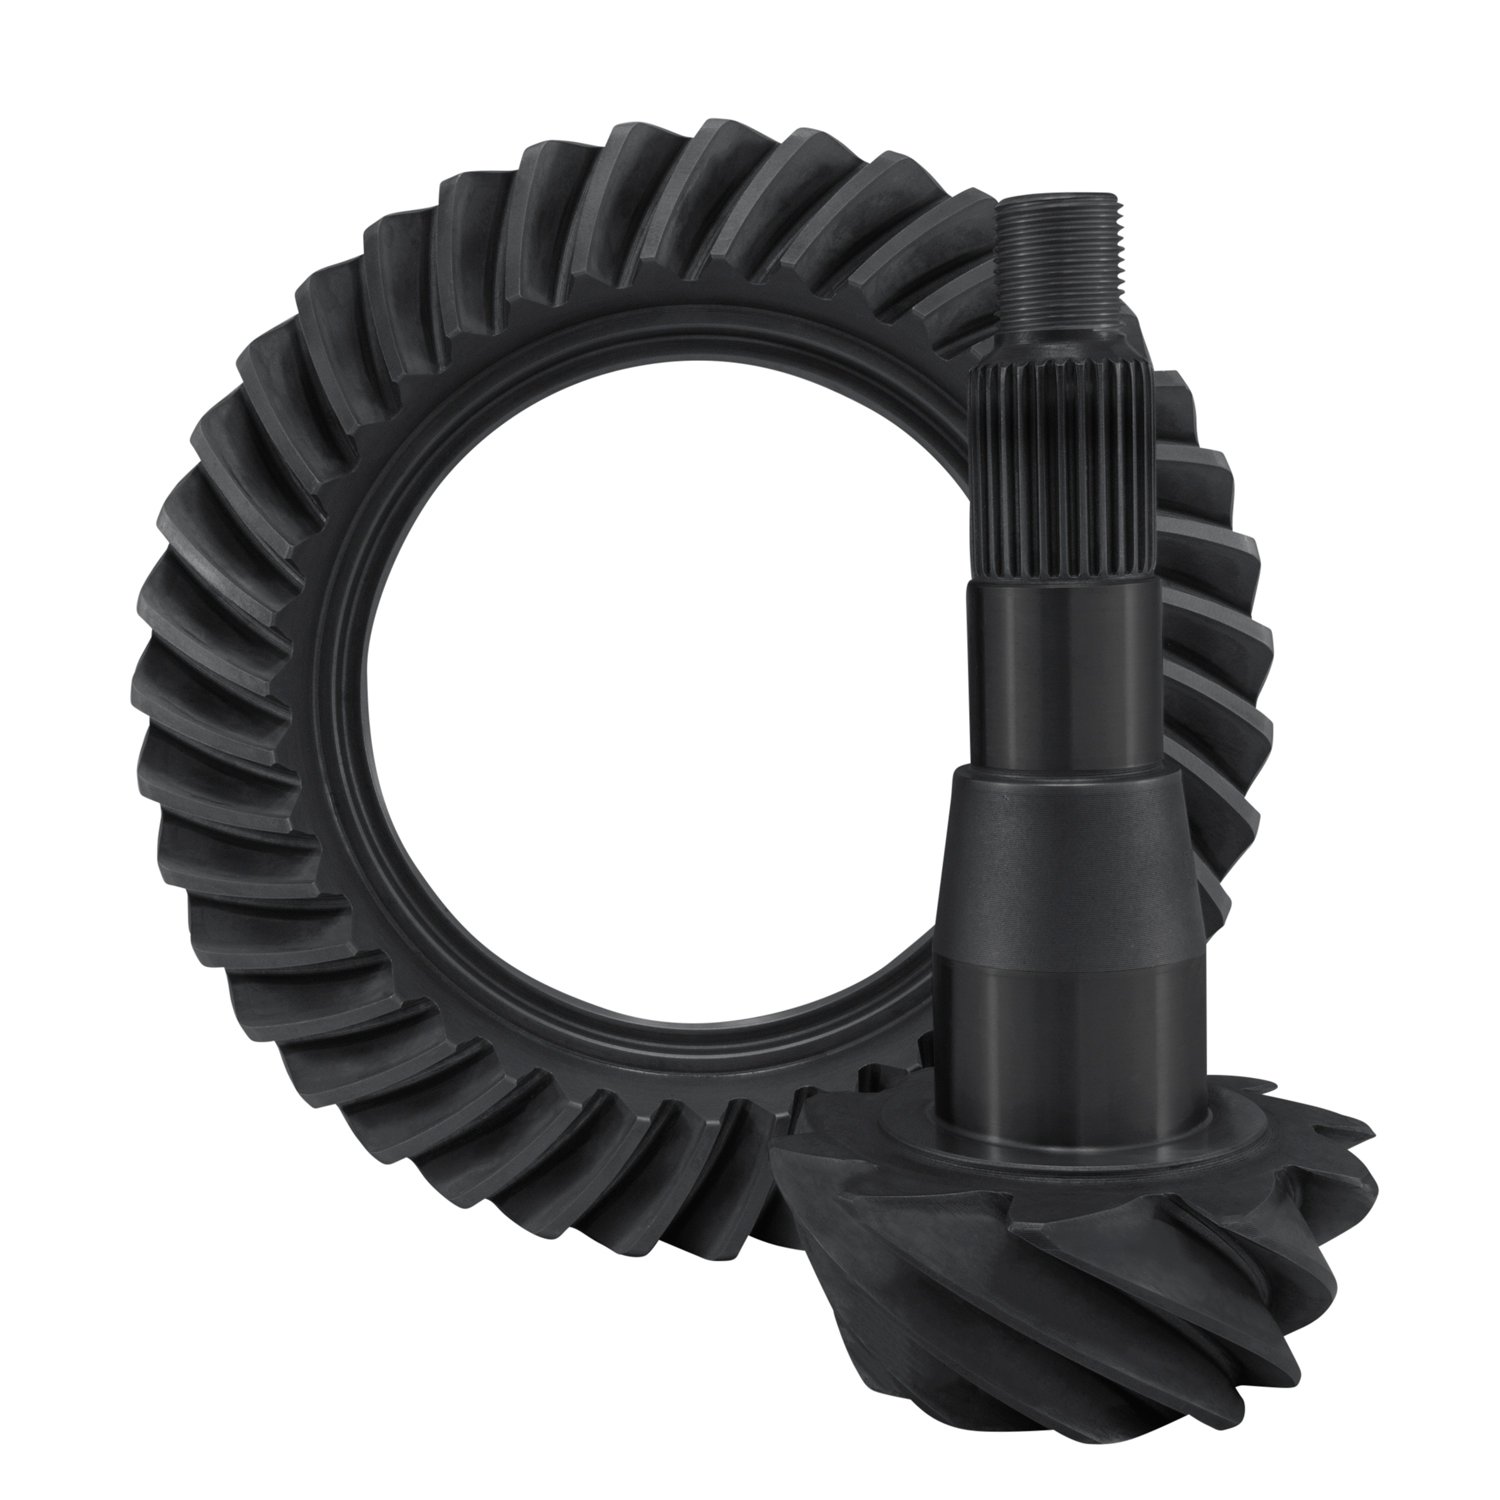 High Performance Ring & Pinion Set, 2011-Up Chrysler 9.25 in. Zf, 3.21 Ratio